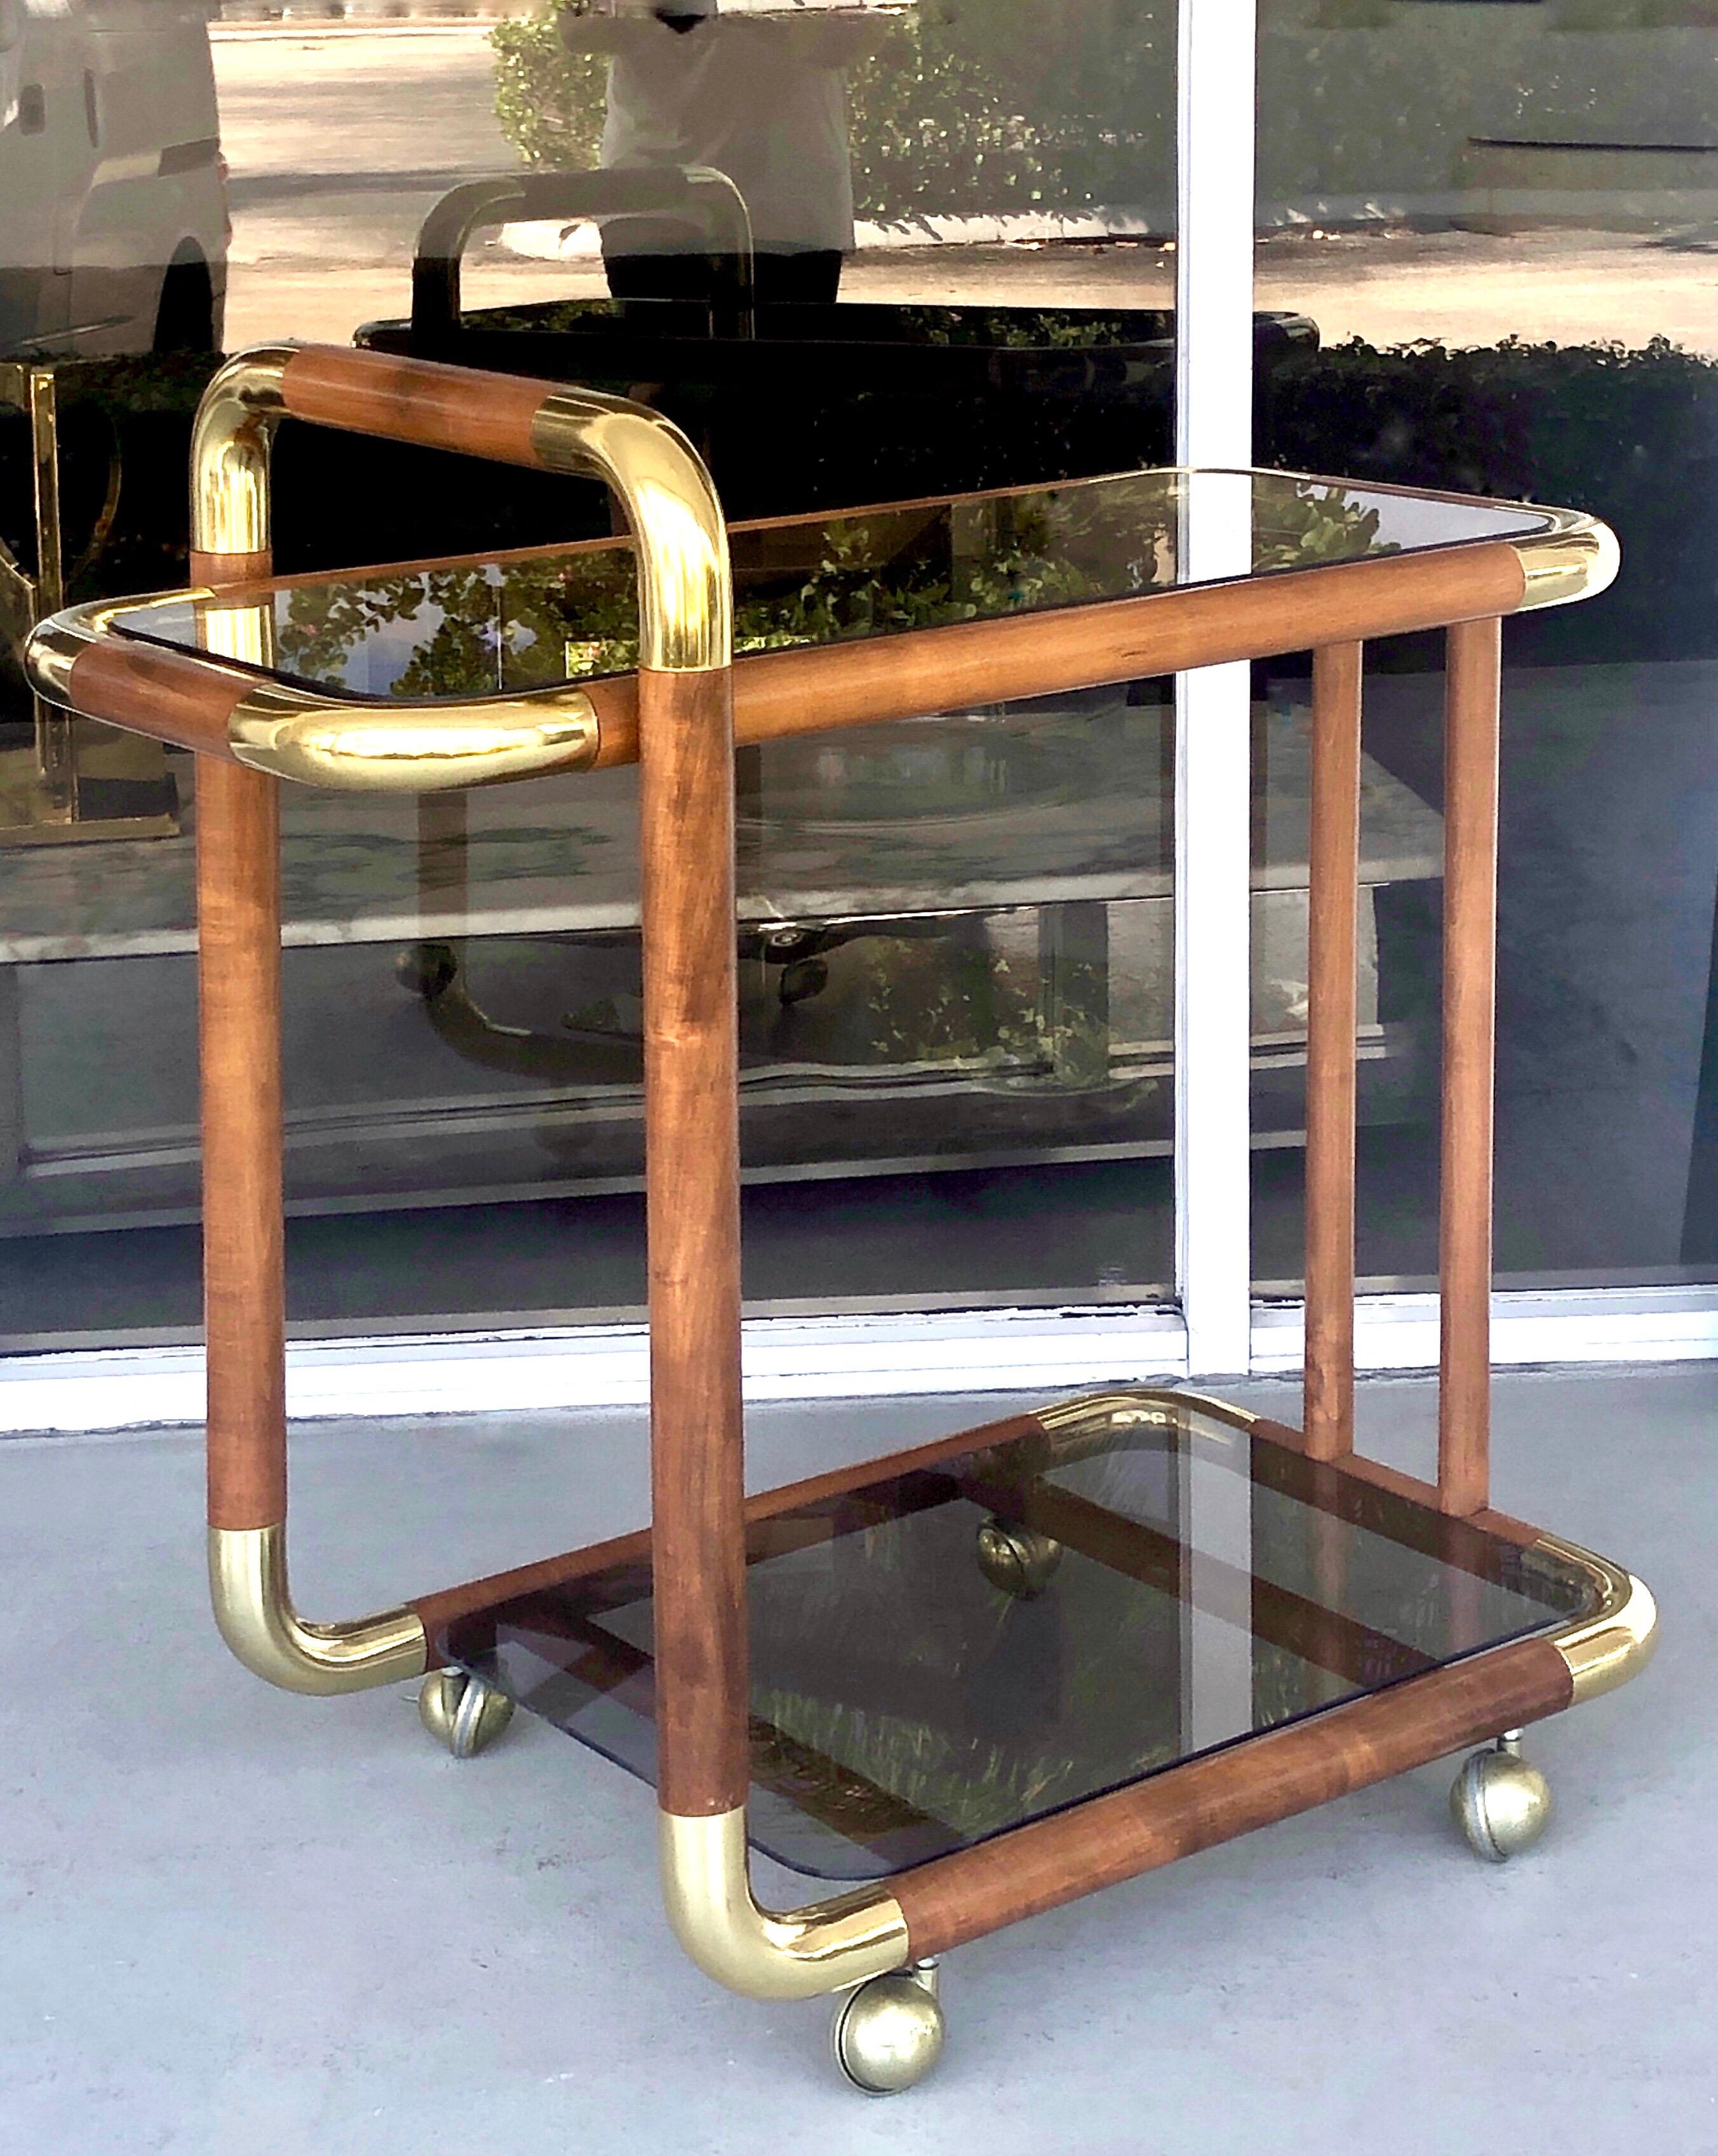 A 1970s bar cart. A thick solid wood frame with radial brass corners. Bronze color glass surfaces. Quite unique with wonderful lines and great looking.